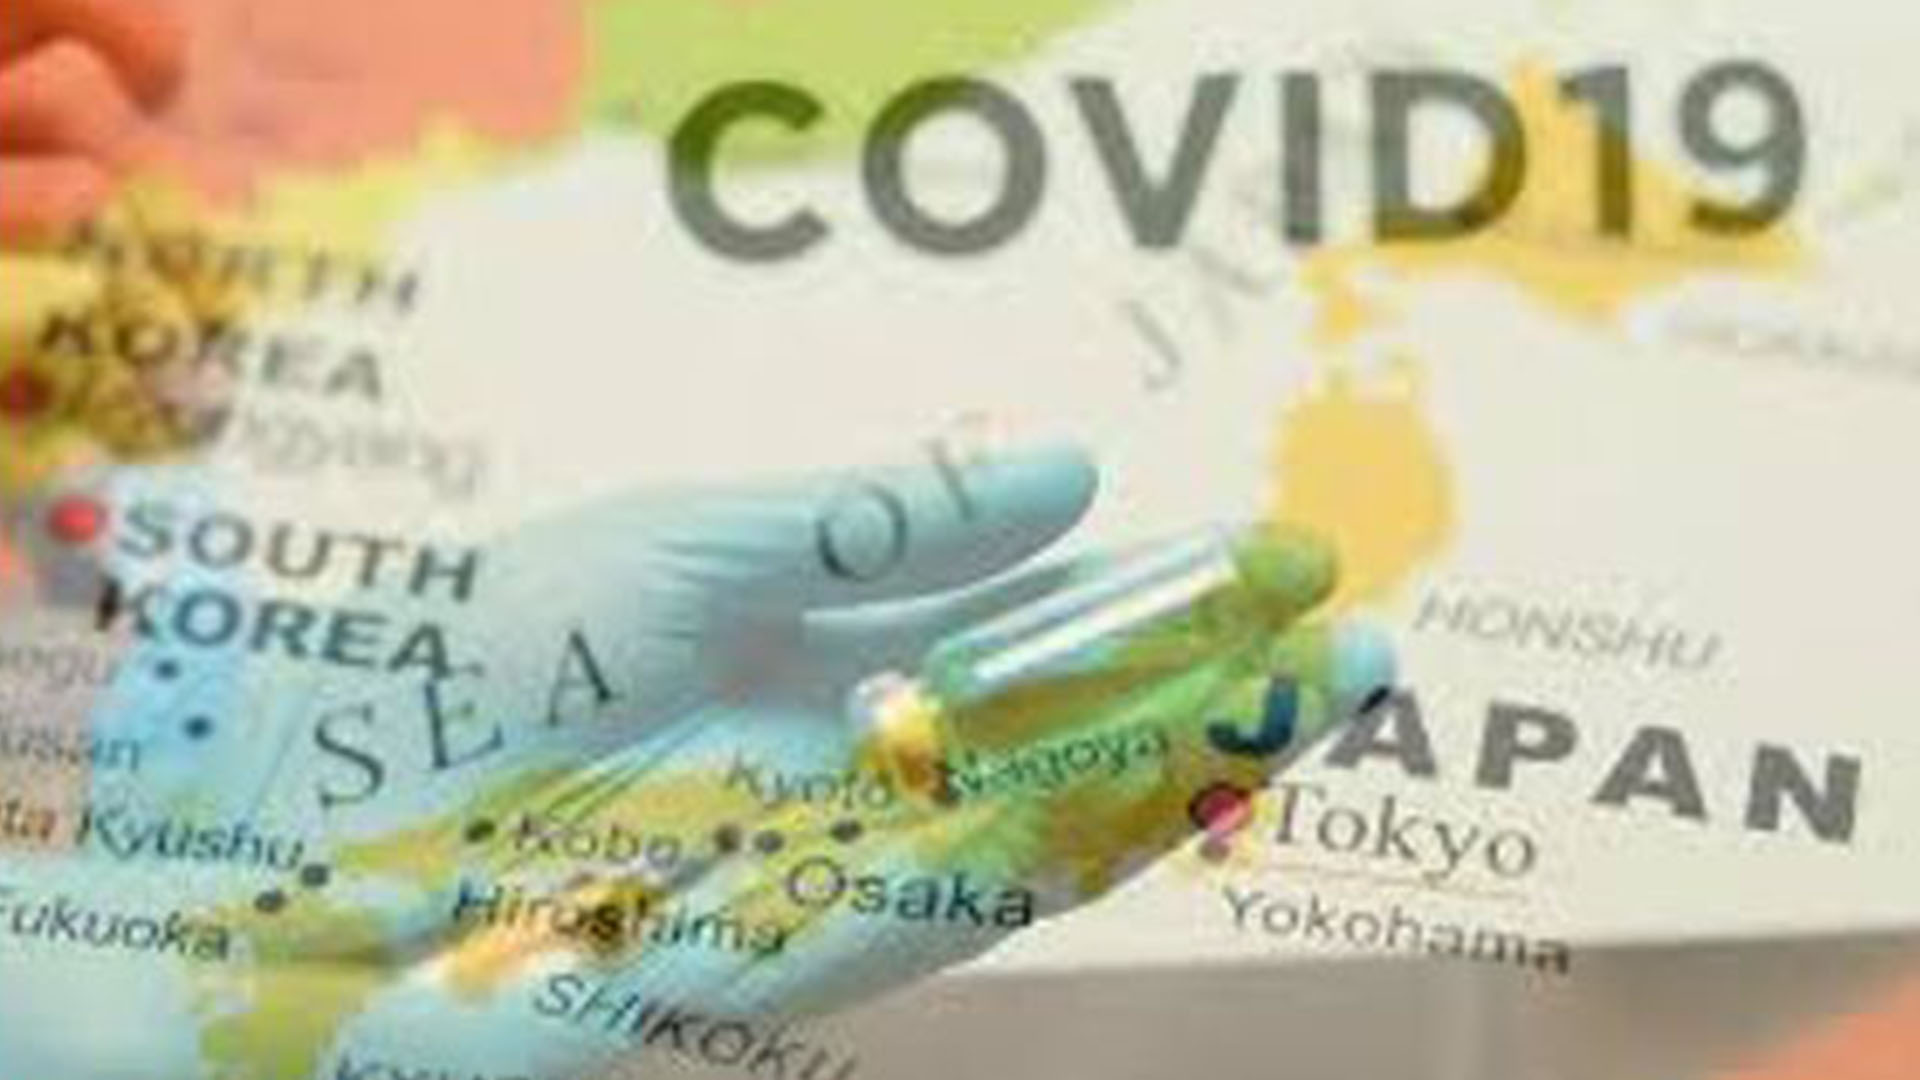 Japanese govt planning to offer free COVID-19 vaccines to all residents